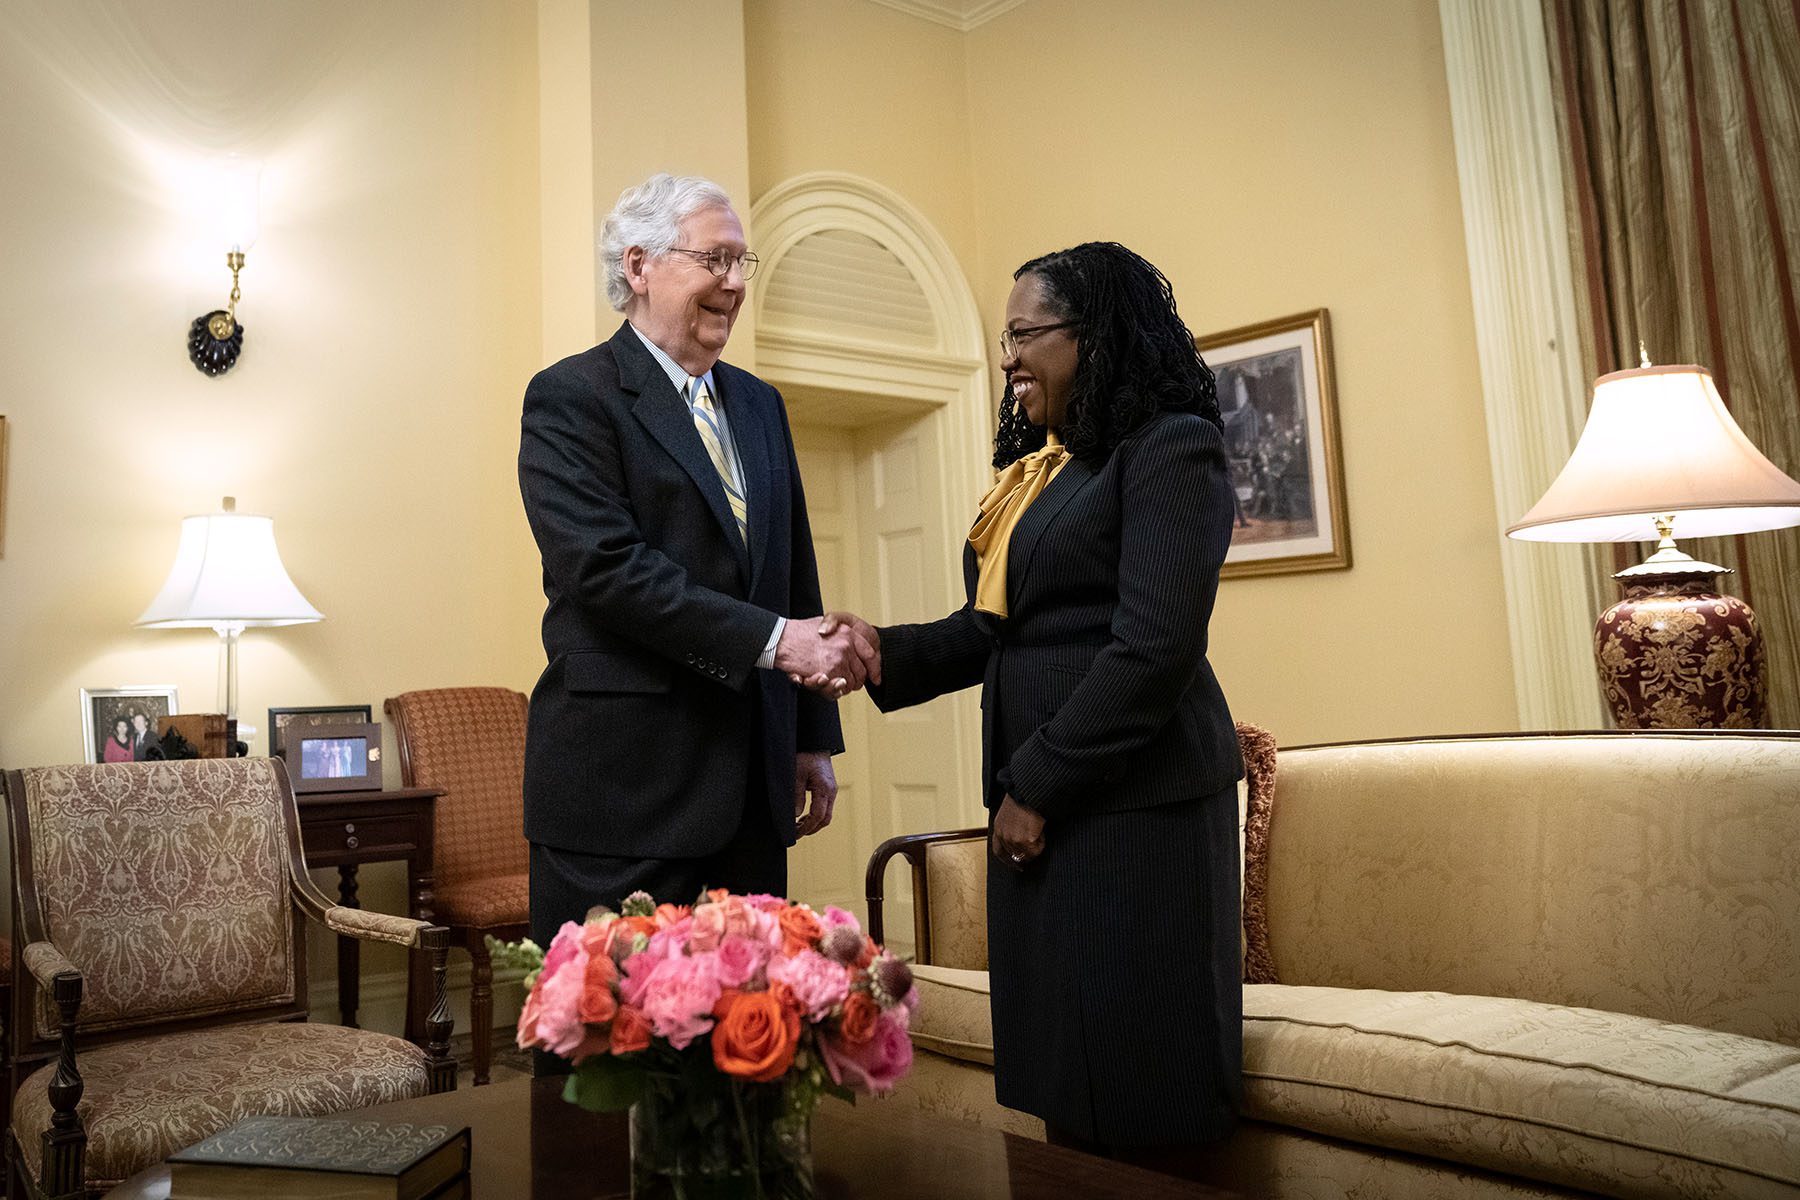 Senate Minority Leader Mitch McConnell shakes hands with Supreme Court Nominee Judge Ketanji Brown Jackson at the start of their meeting in his Capitol Hill office.